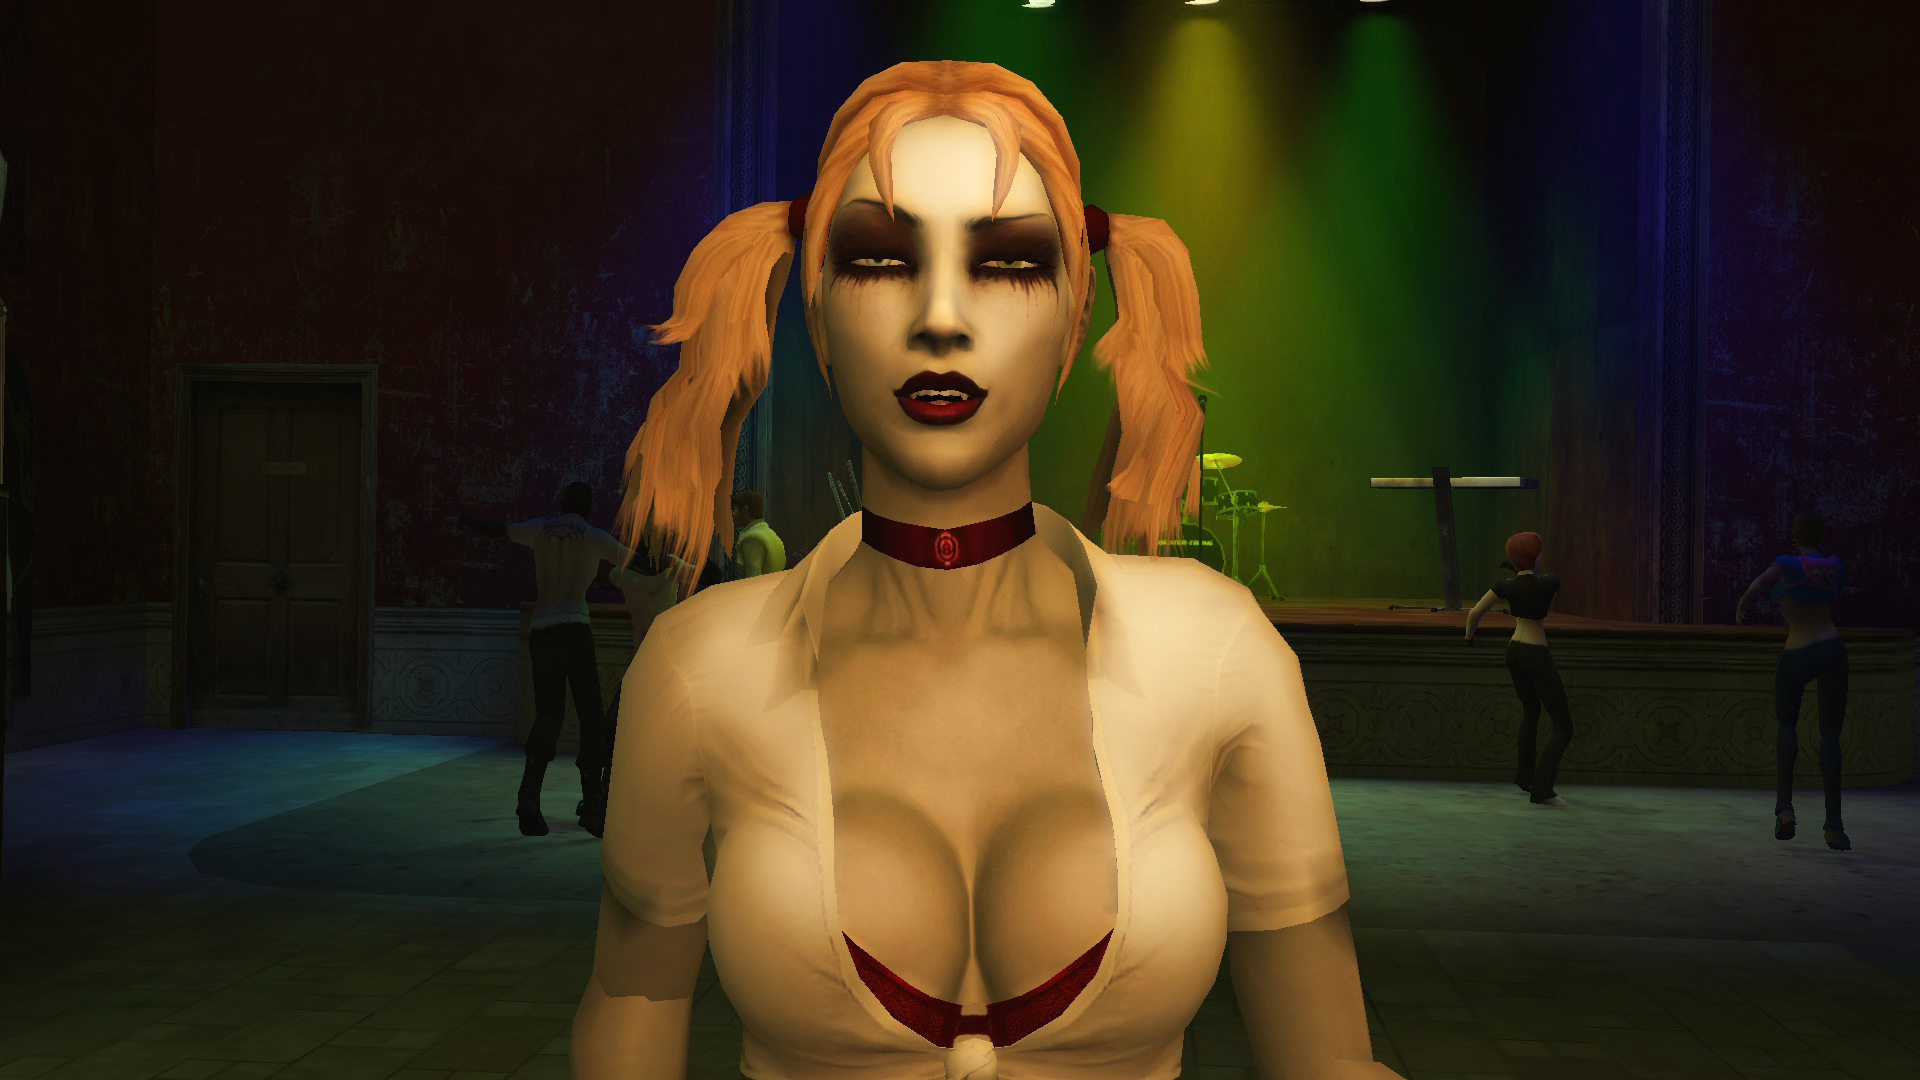 Jeanette Voerman, a Malkavian vampire, in one of the best vampire games - Vampire: The Masquerade Bloodlines